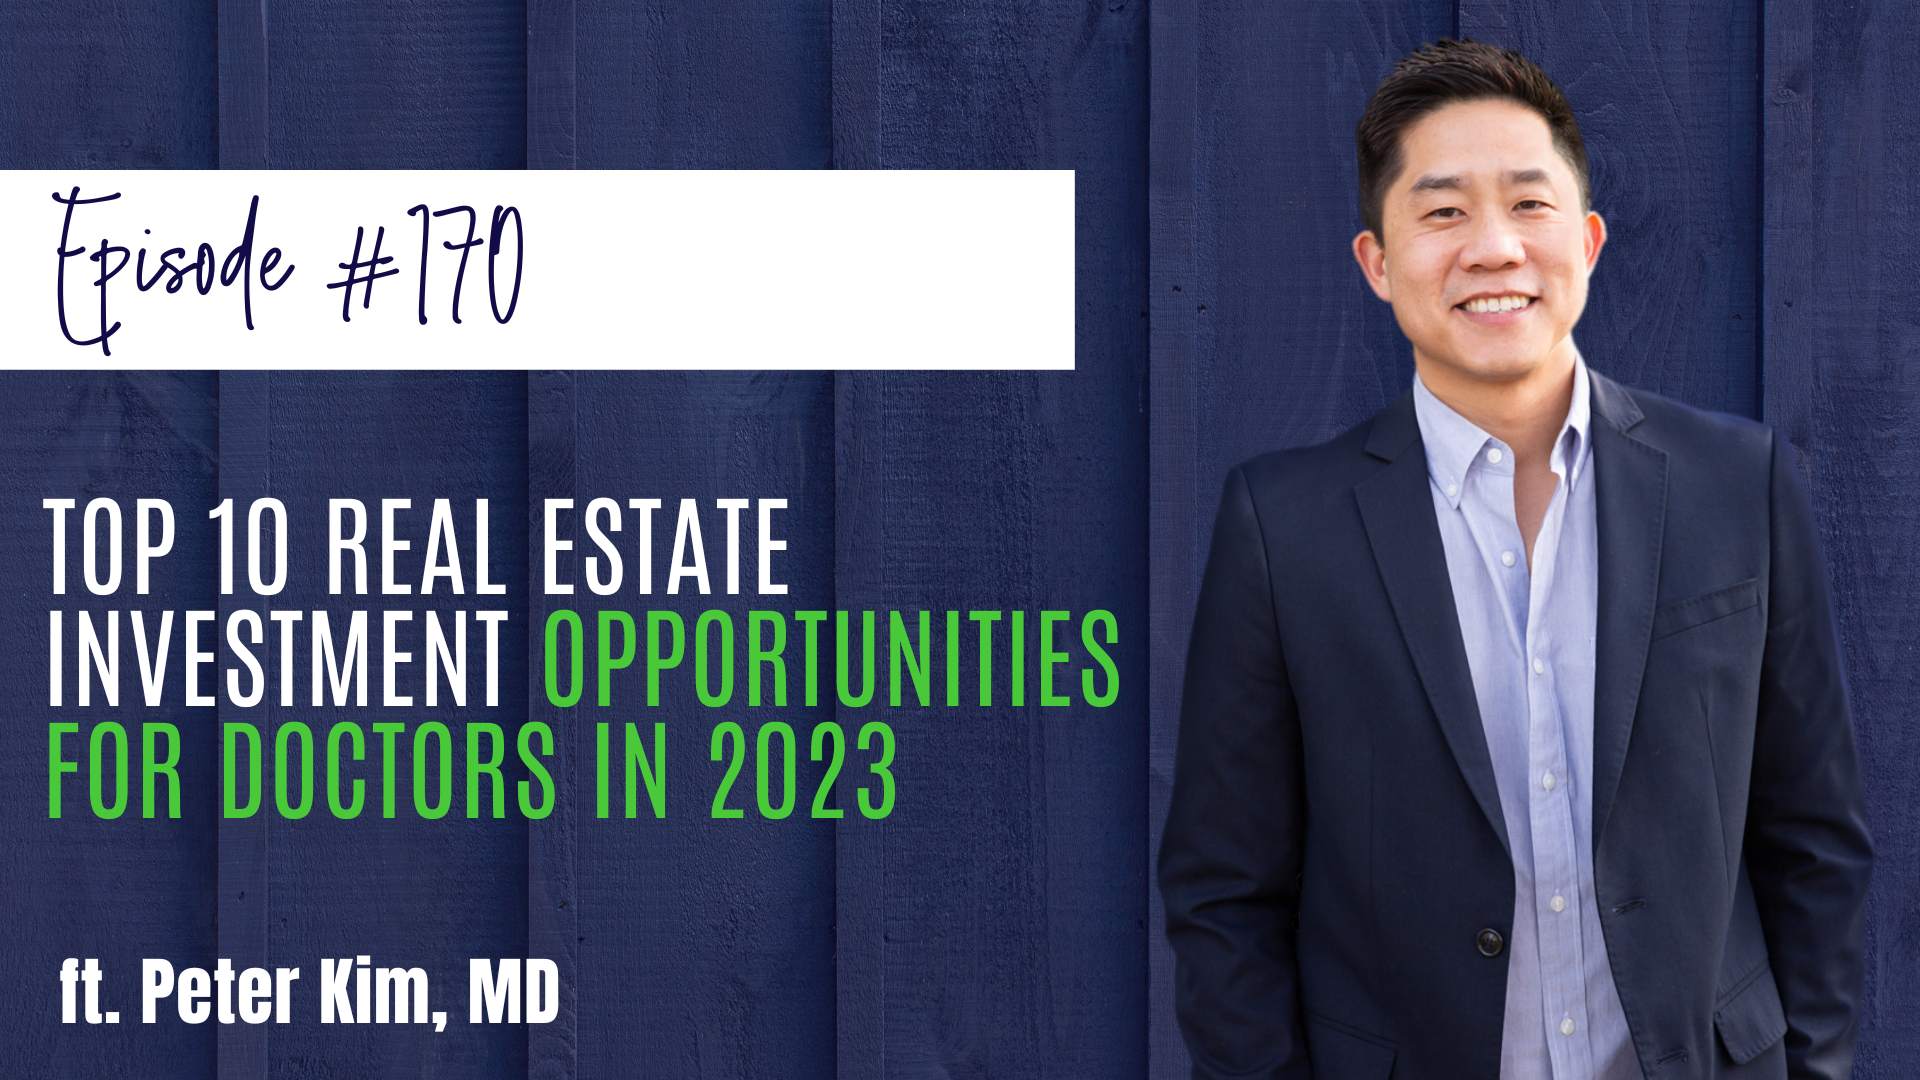 Top 10 Real Estate Investment Opportunities for Doctors In 2023